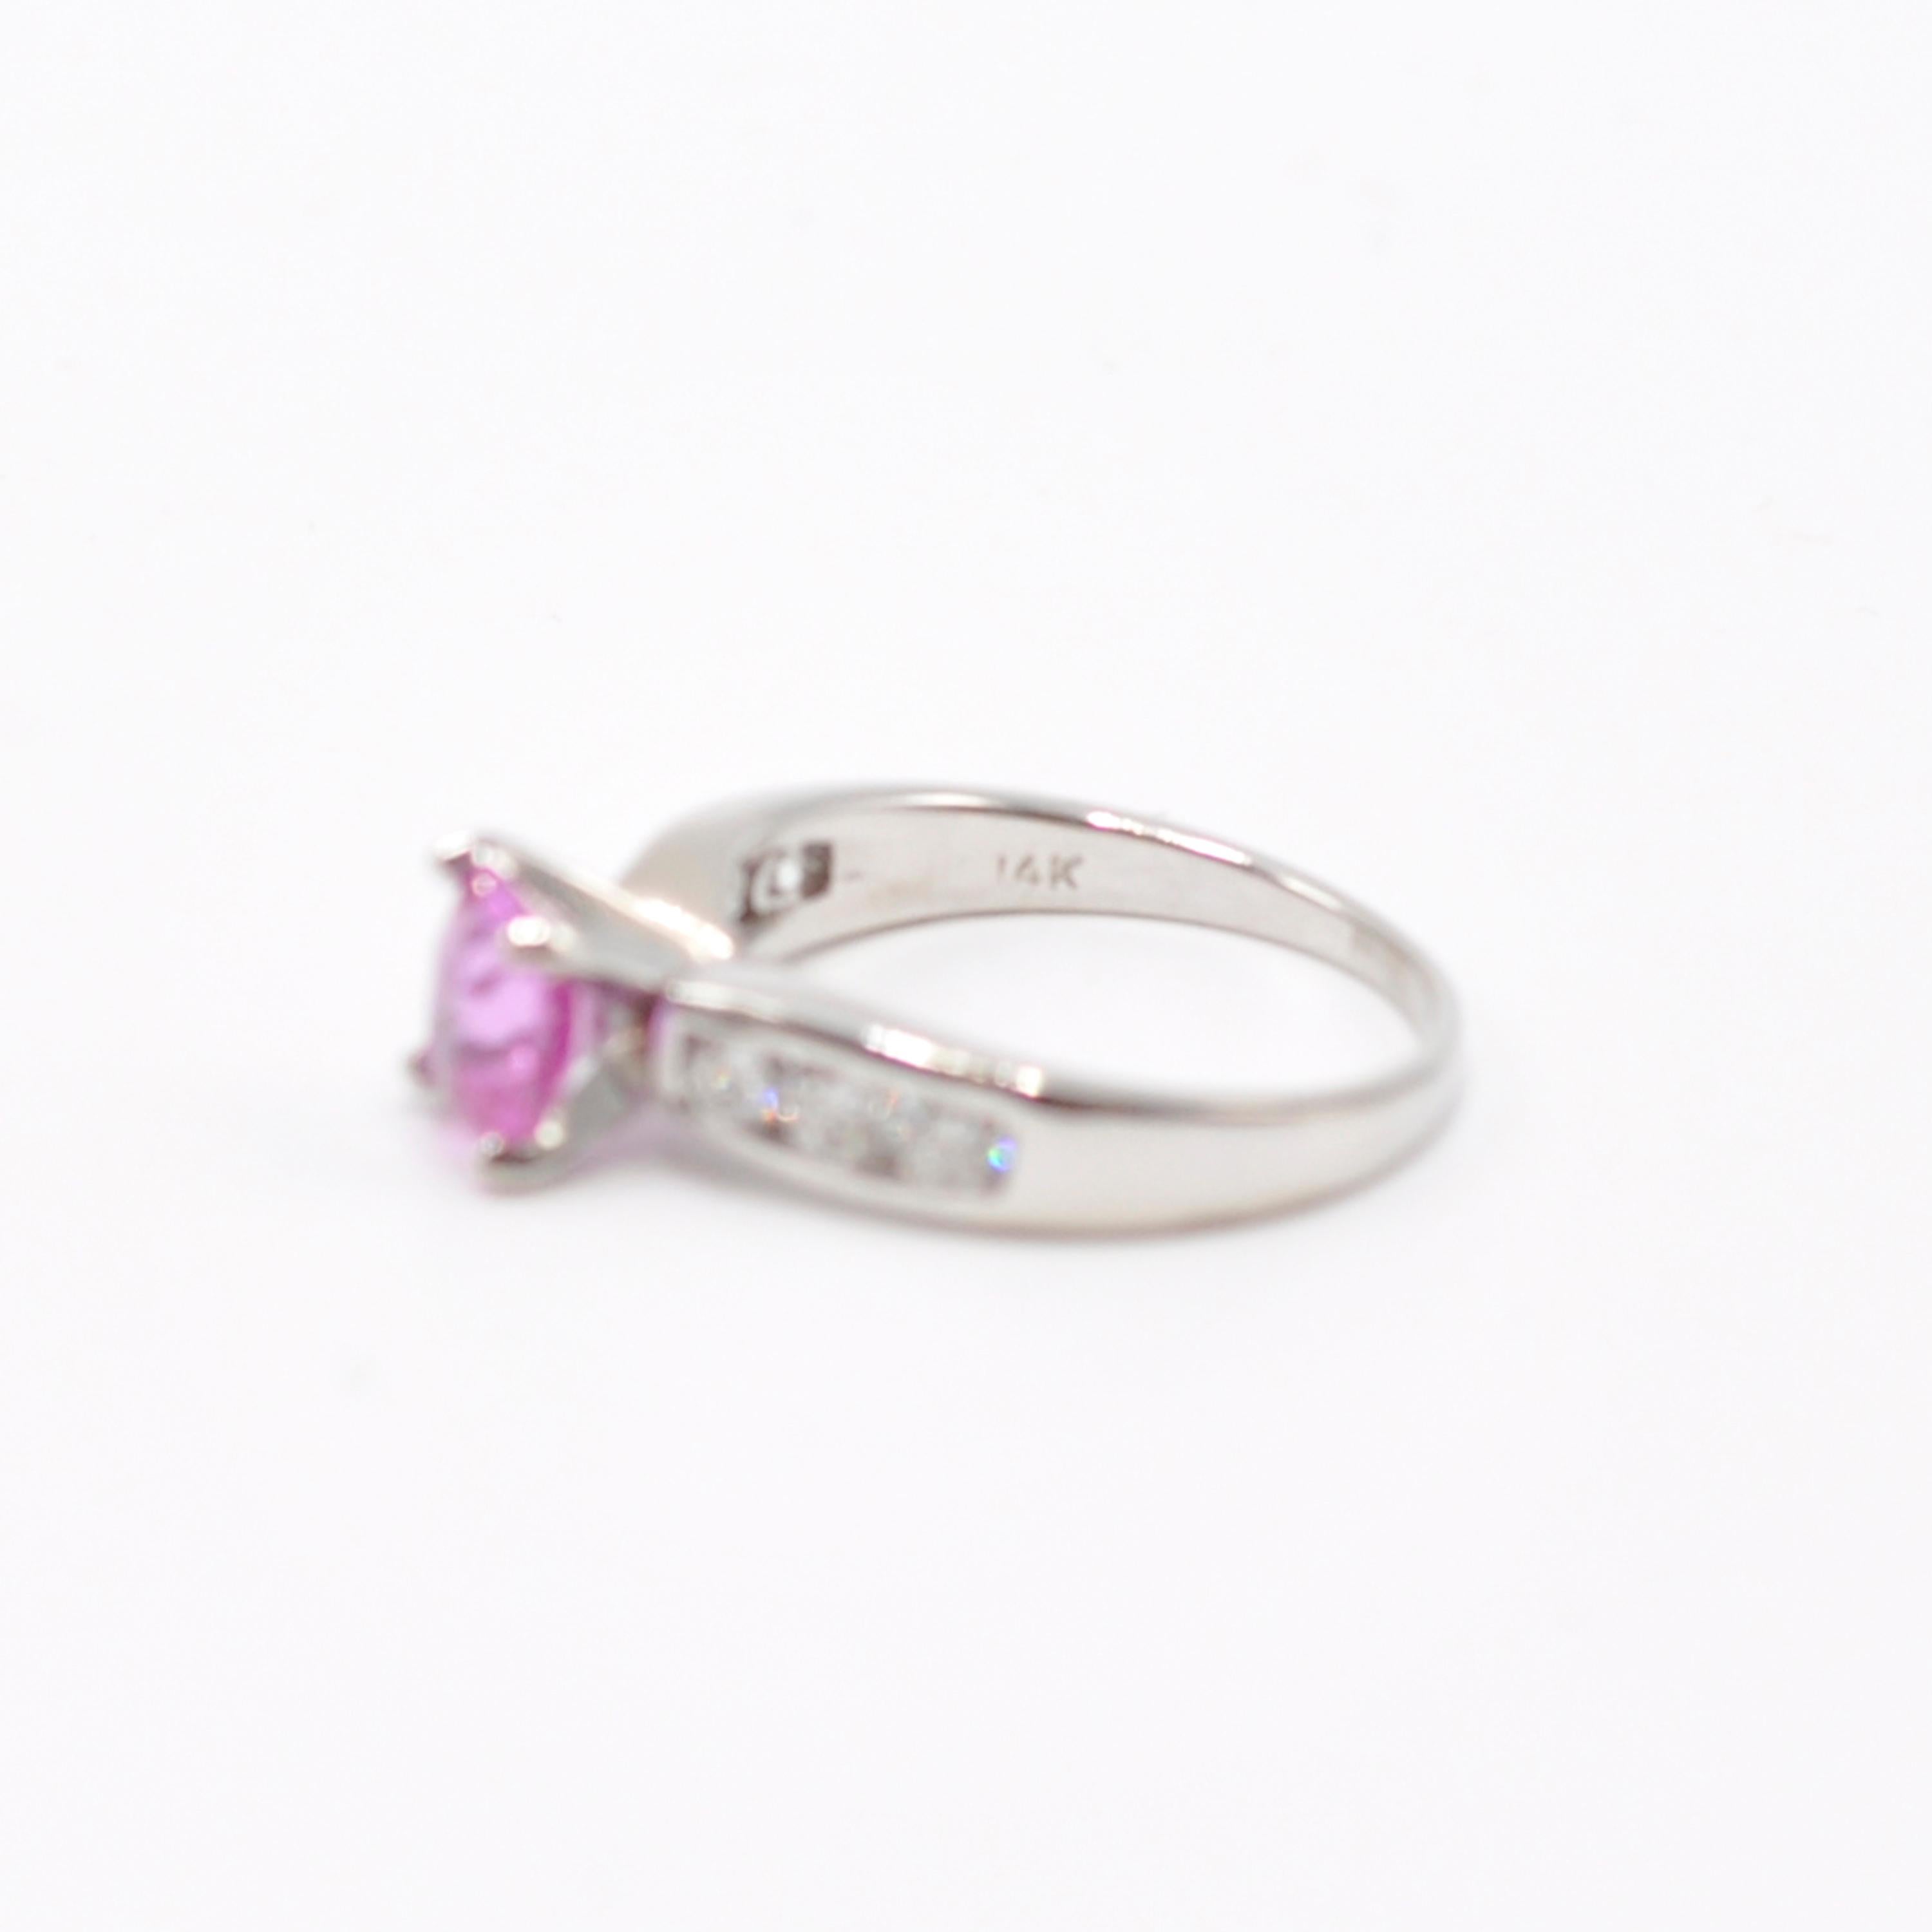 Pink Sapphires are thought to have metaphysical qualities and vibrational frequencies that help the heart and mind align. Emotional healing, courage to be open to love, and a stronger compassion for others are some of the effects attributed to them.